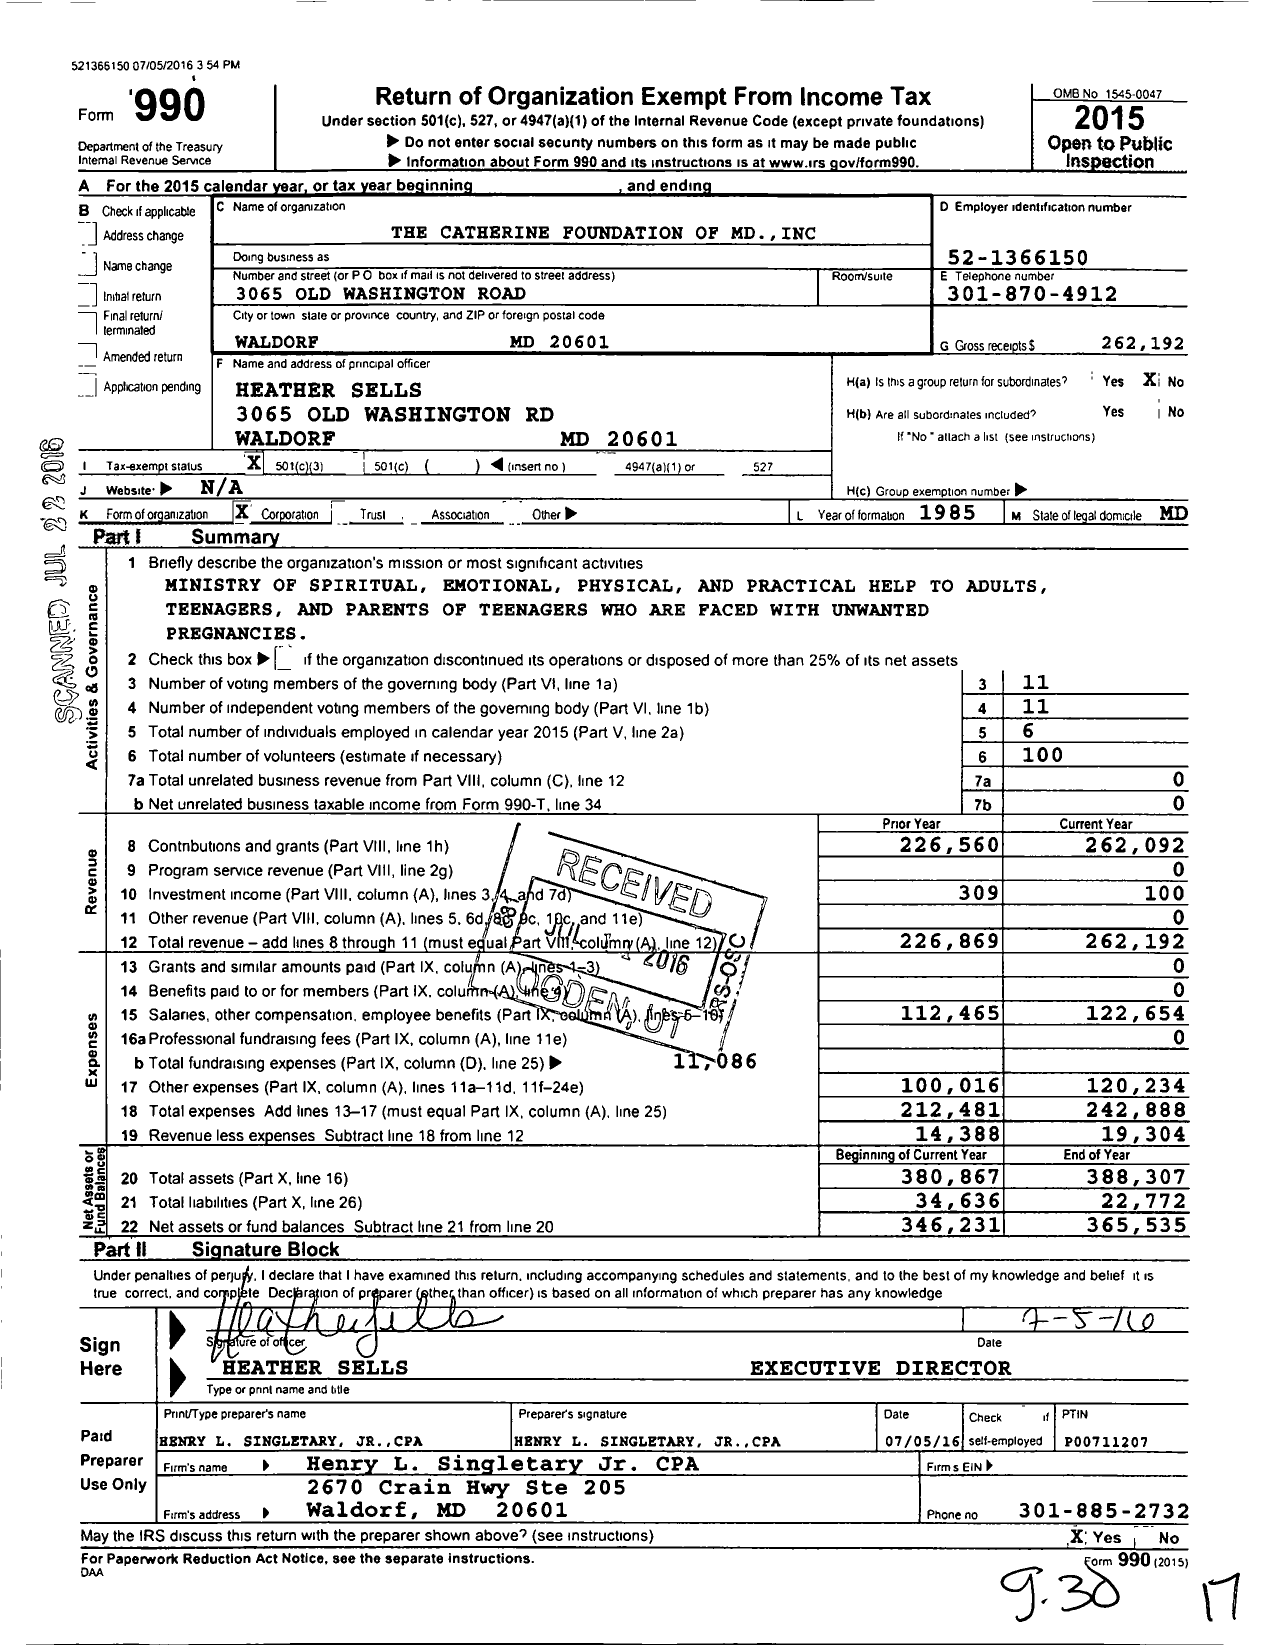 Image of first page of 2015 Form 990 for Catherine Foundation of MD